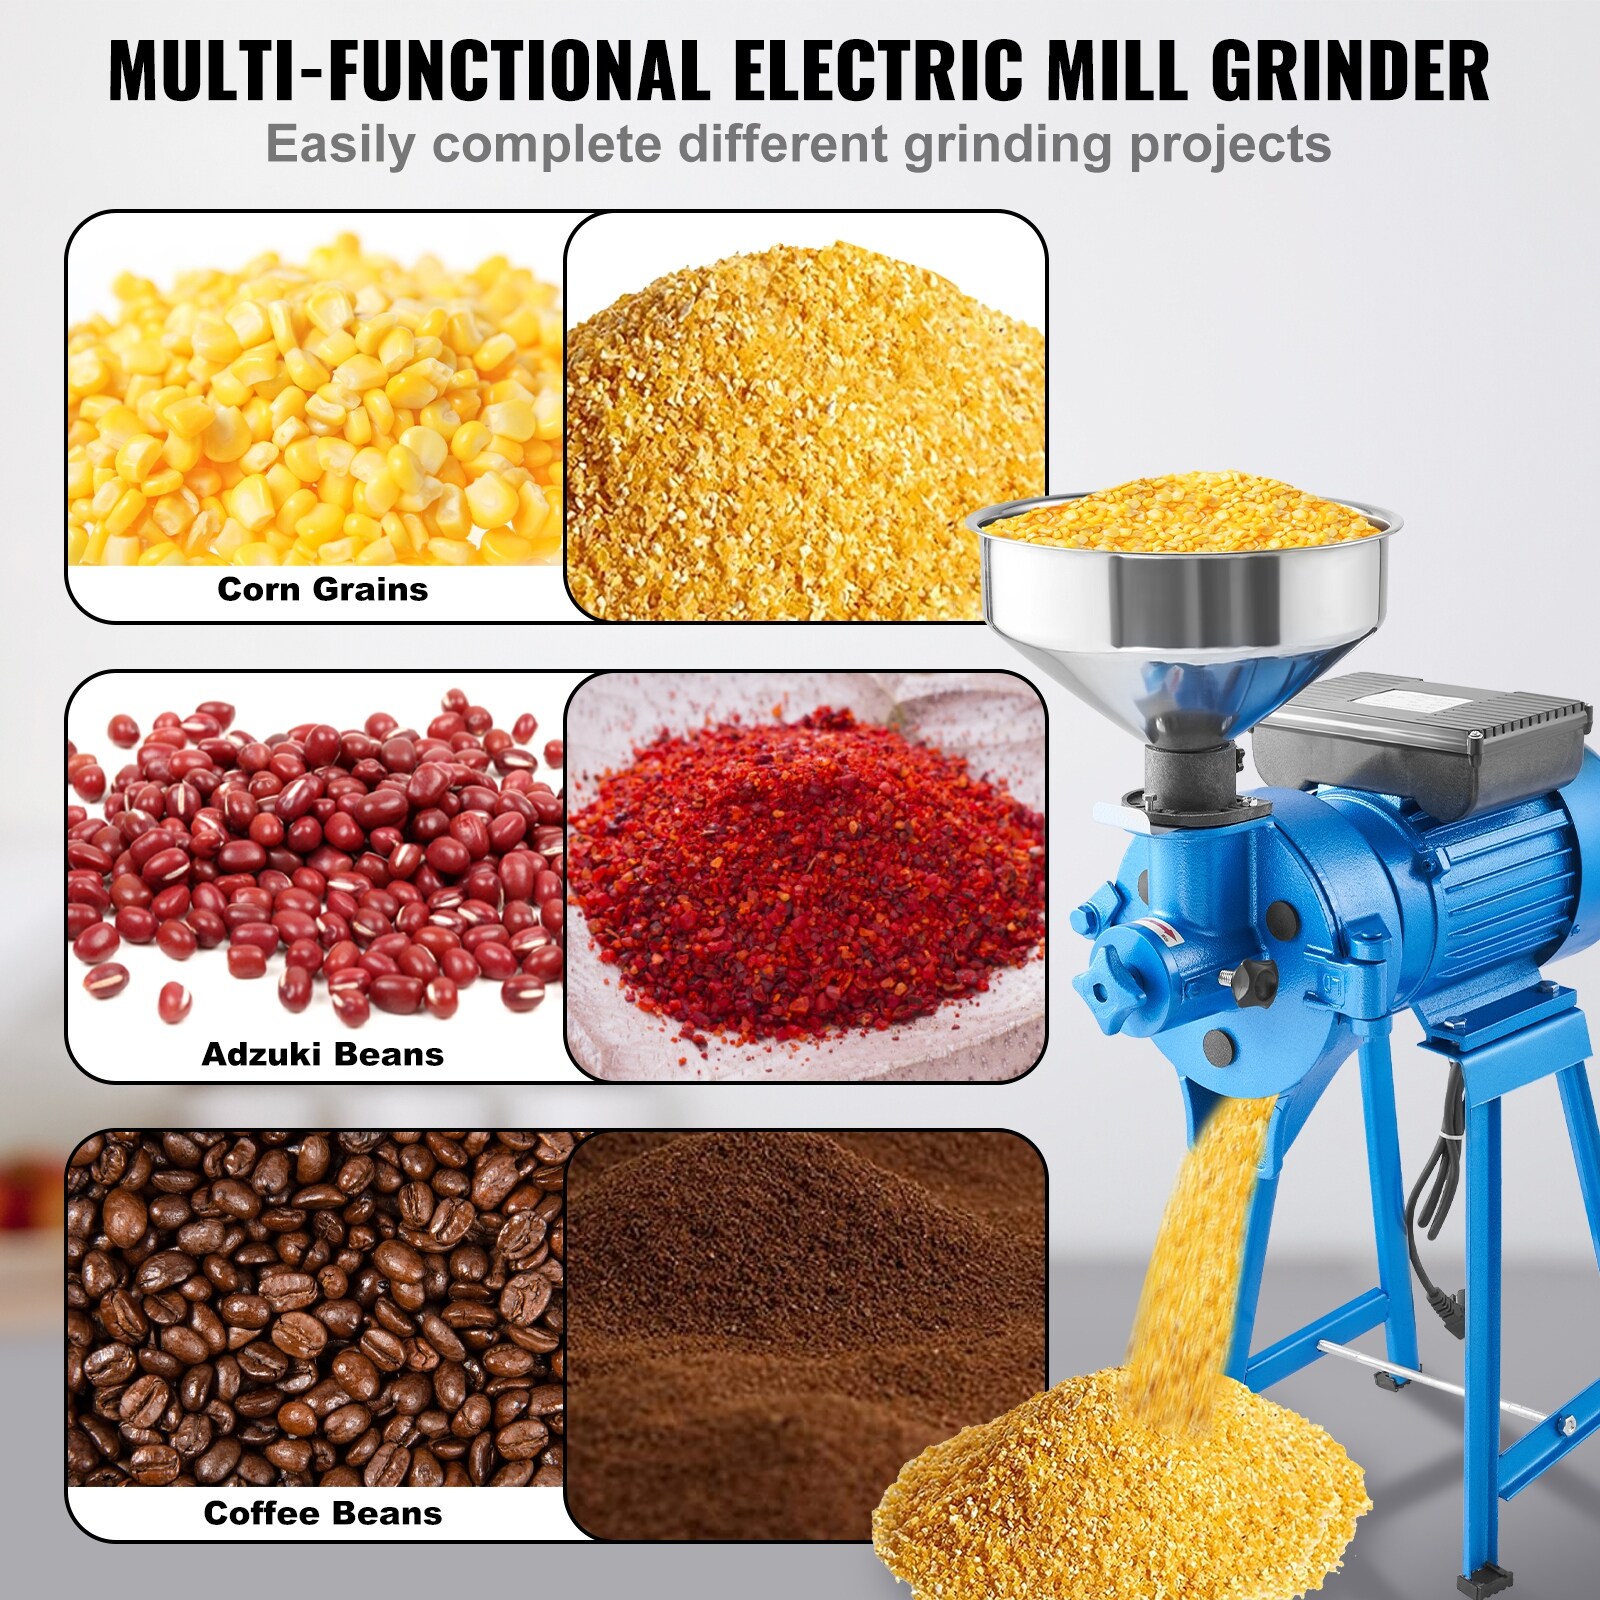 https://ak1.ostkcdn.com/images/products/is/images/direct/134f54ecf6ea72f640d1b0340b62e07a4243f8c6/VEVOR-Electric-Grain-Spice-Mill-Grinder-1500W-110V-Commercial-Corn-Mill-with-Funnel-Thickness-Adjustable.jpg